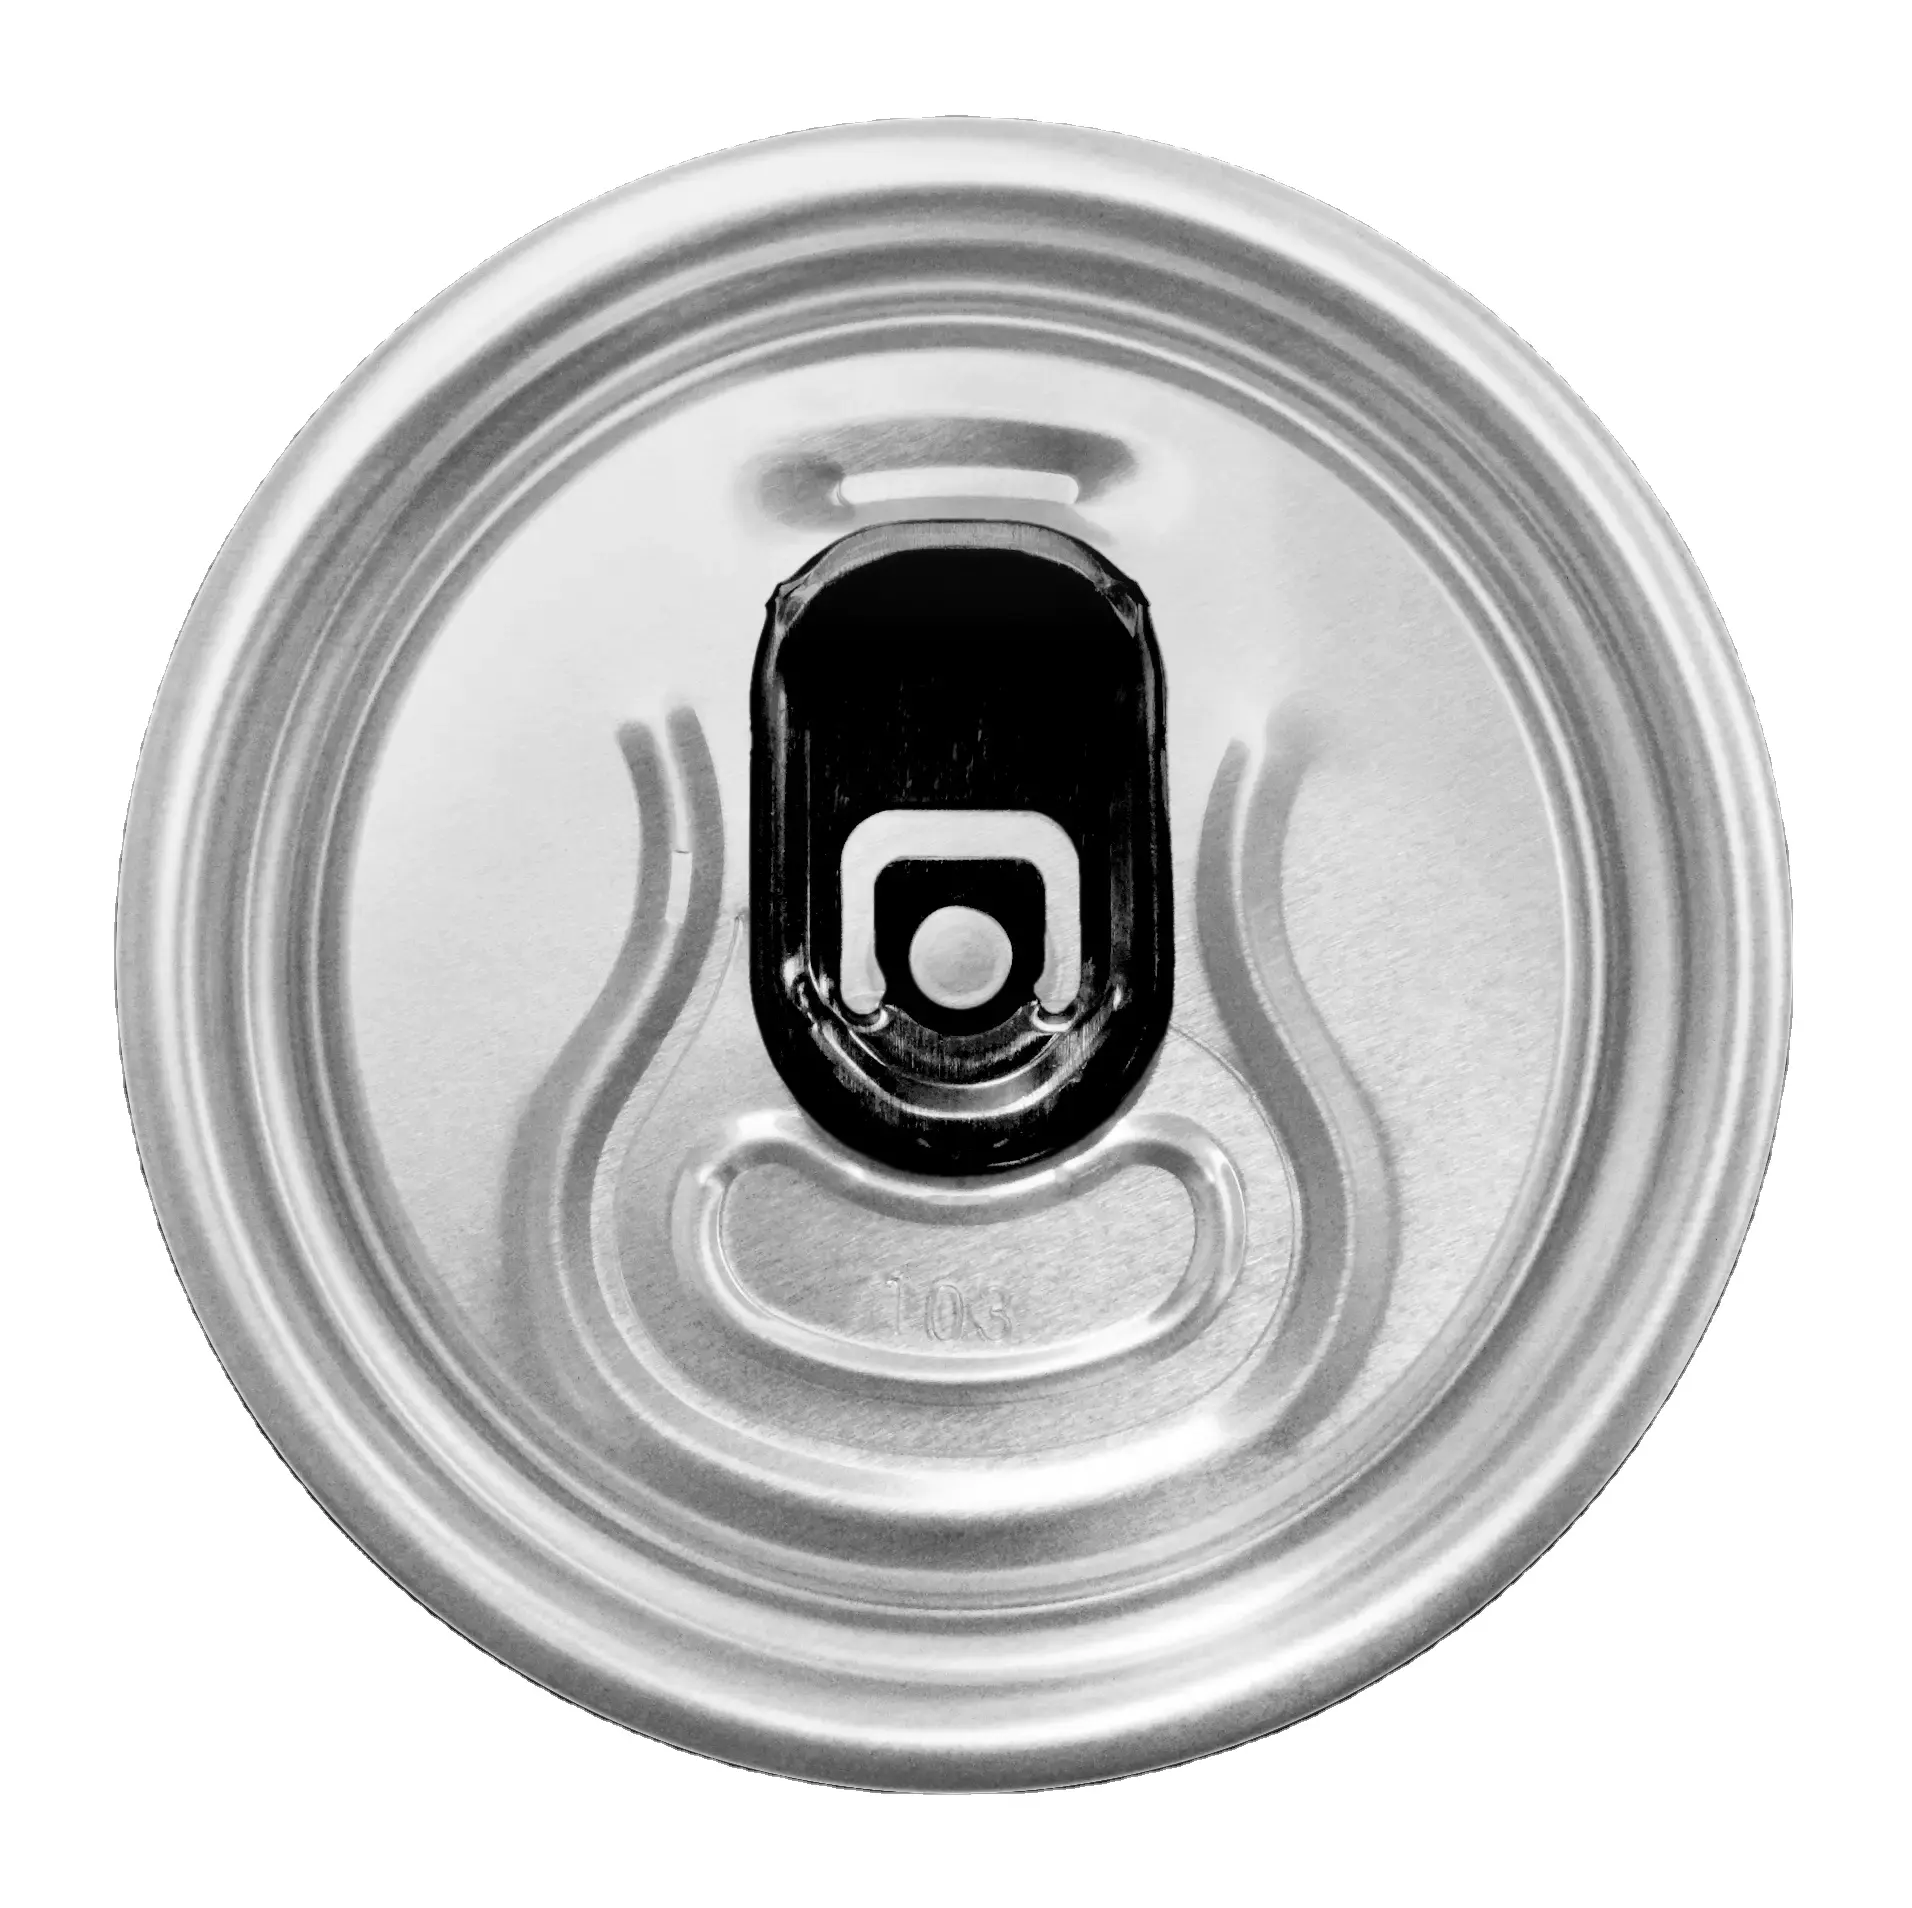 202# 355ml can easy open cap end eoe peel off printing aluminium foil can lids for soda cans